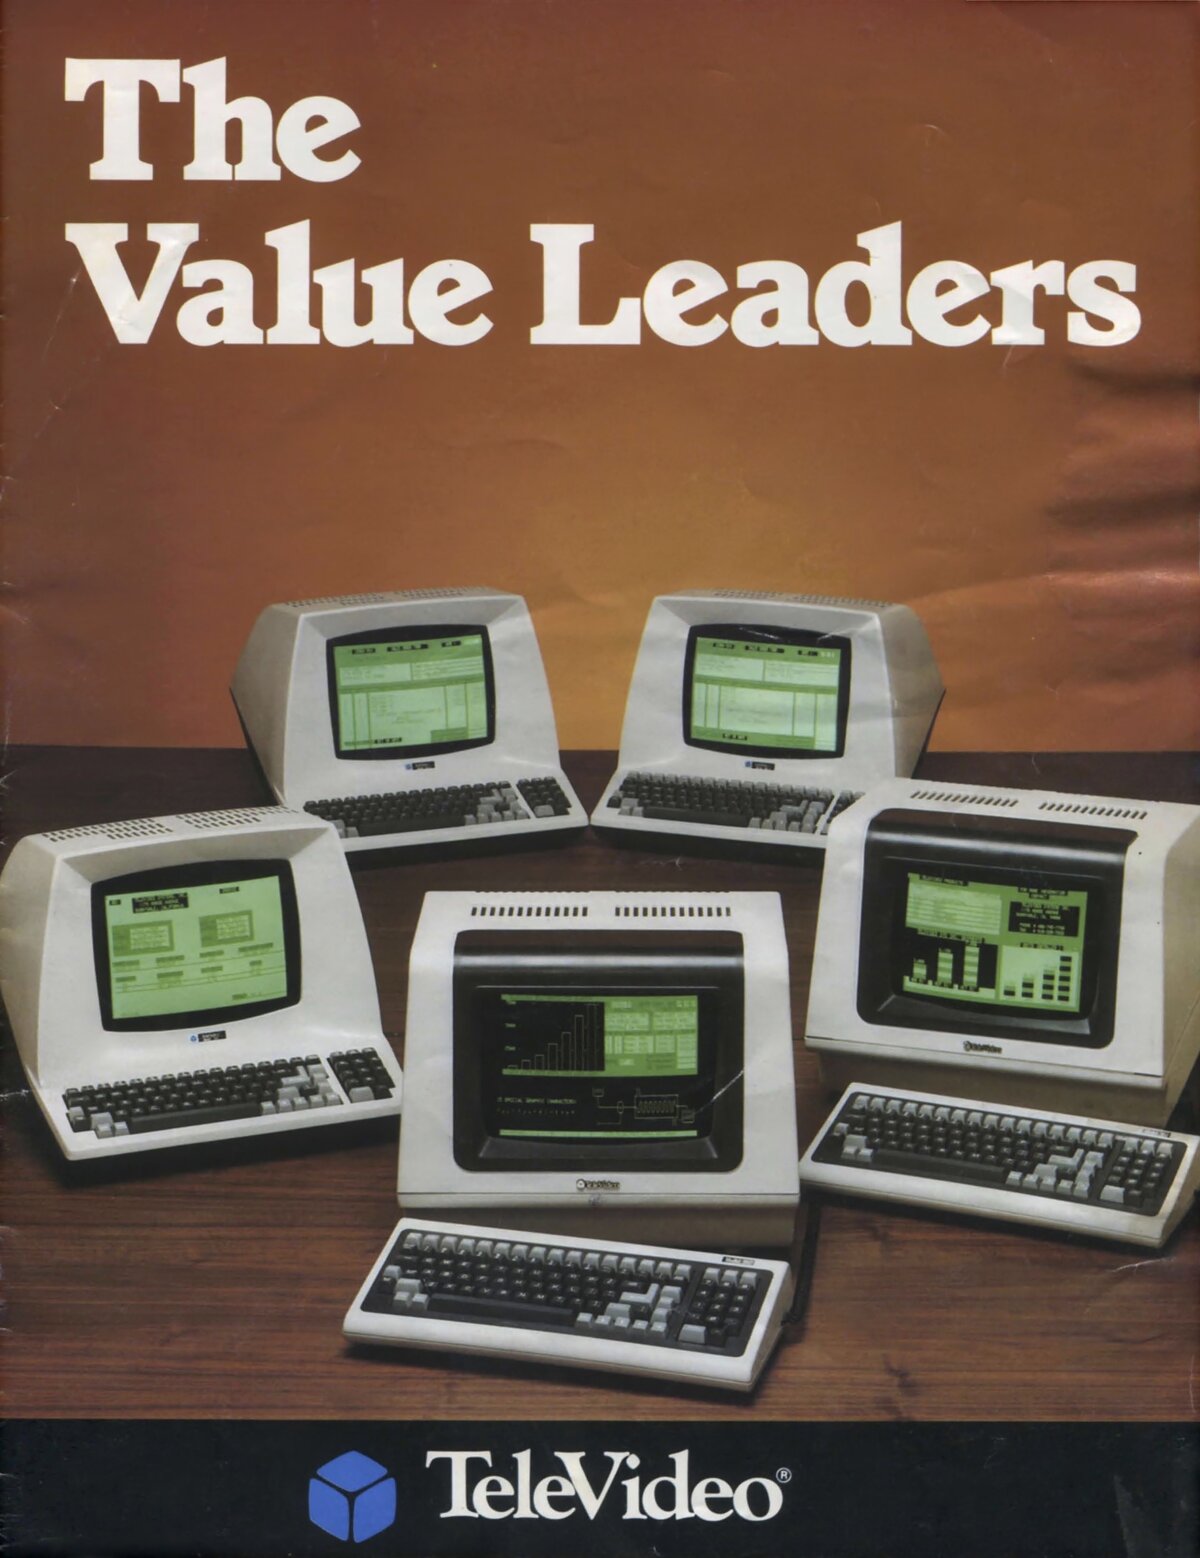 The Value Leaders